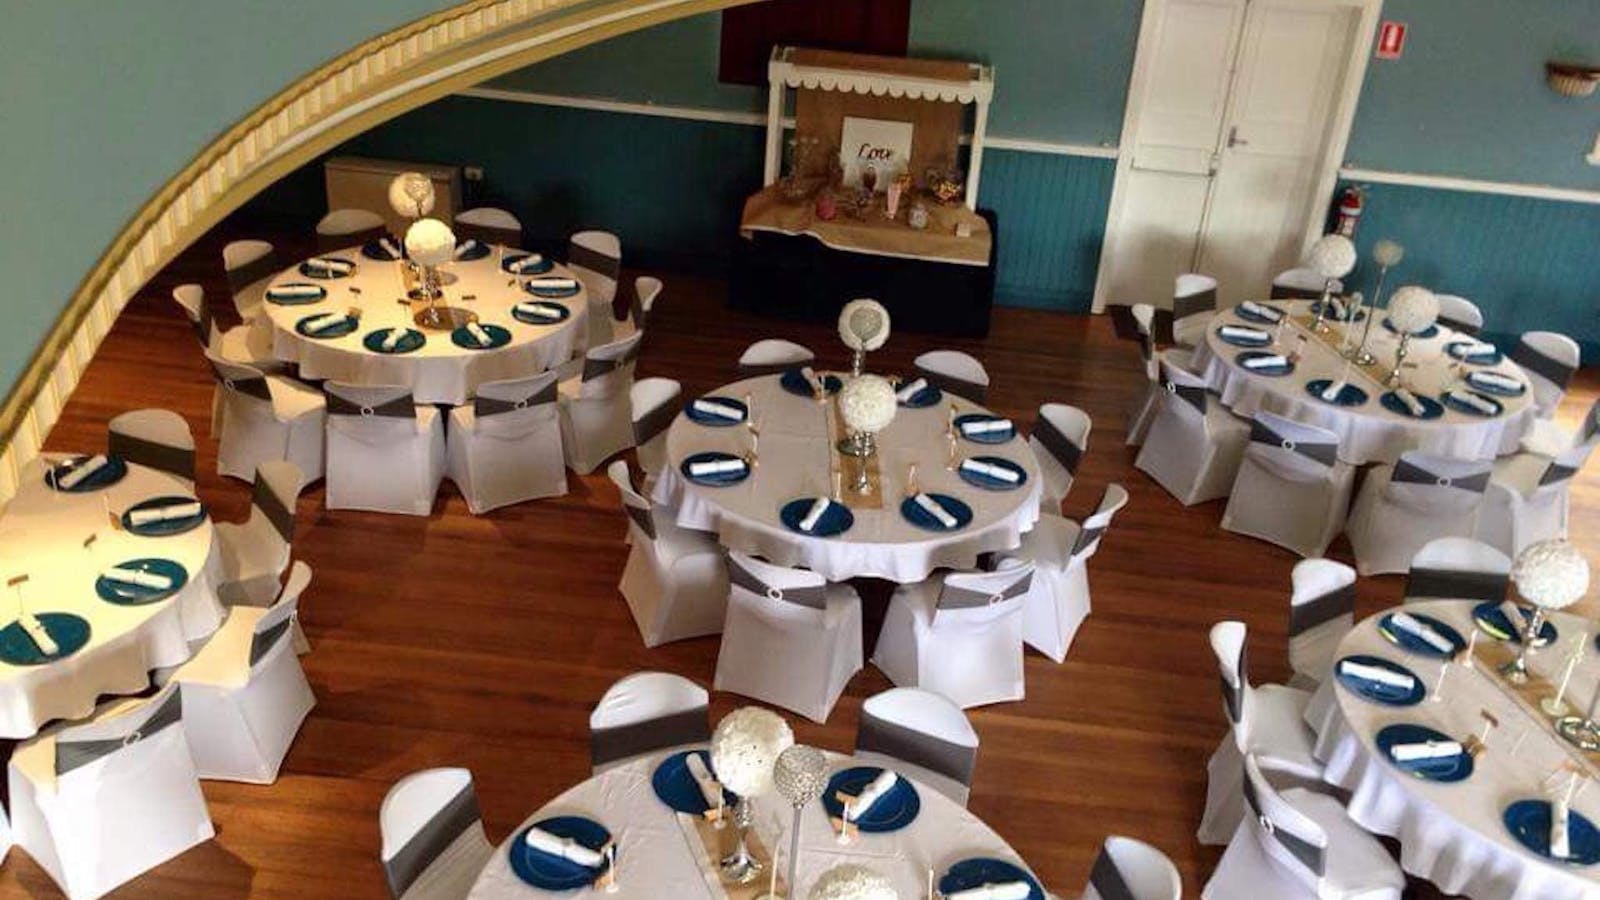 The Main Hall is a perfect venue for weddings with seating for 160 or dancing for 260!